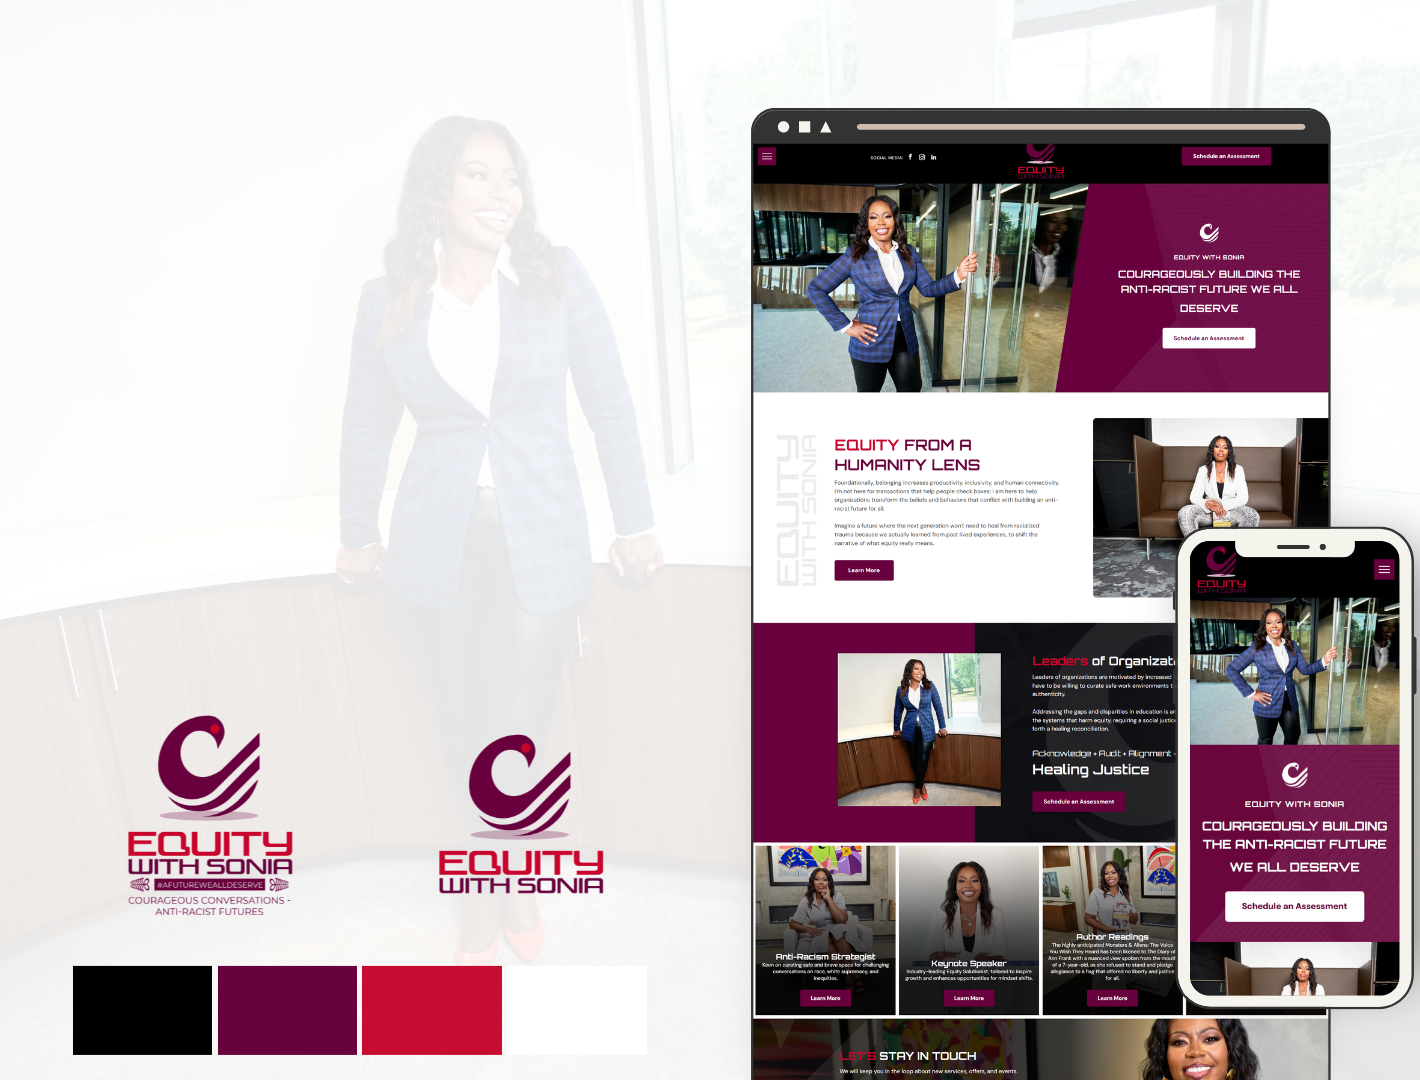 Image presenting a striking website layout designed by Shayla Bre, with attention-grabbing visuals and engaging content.